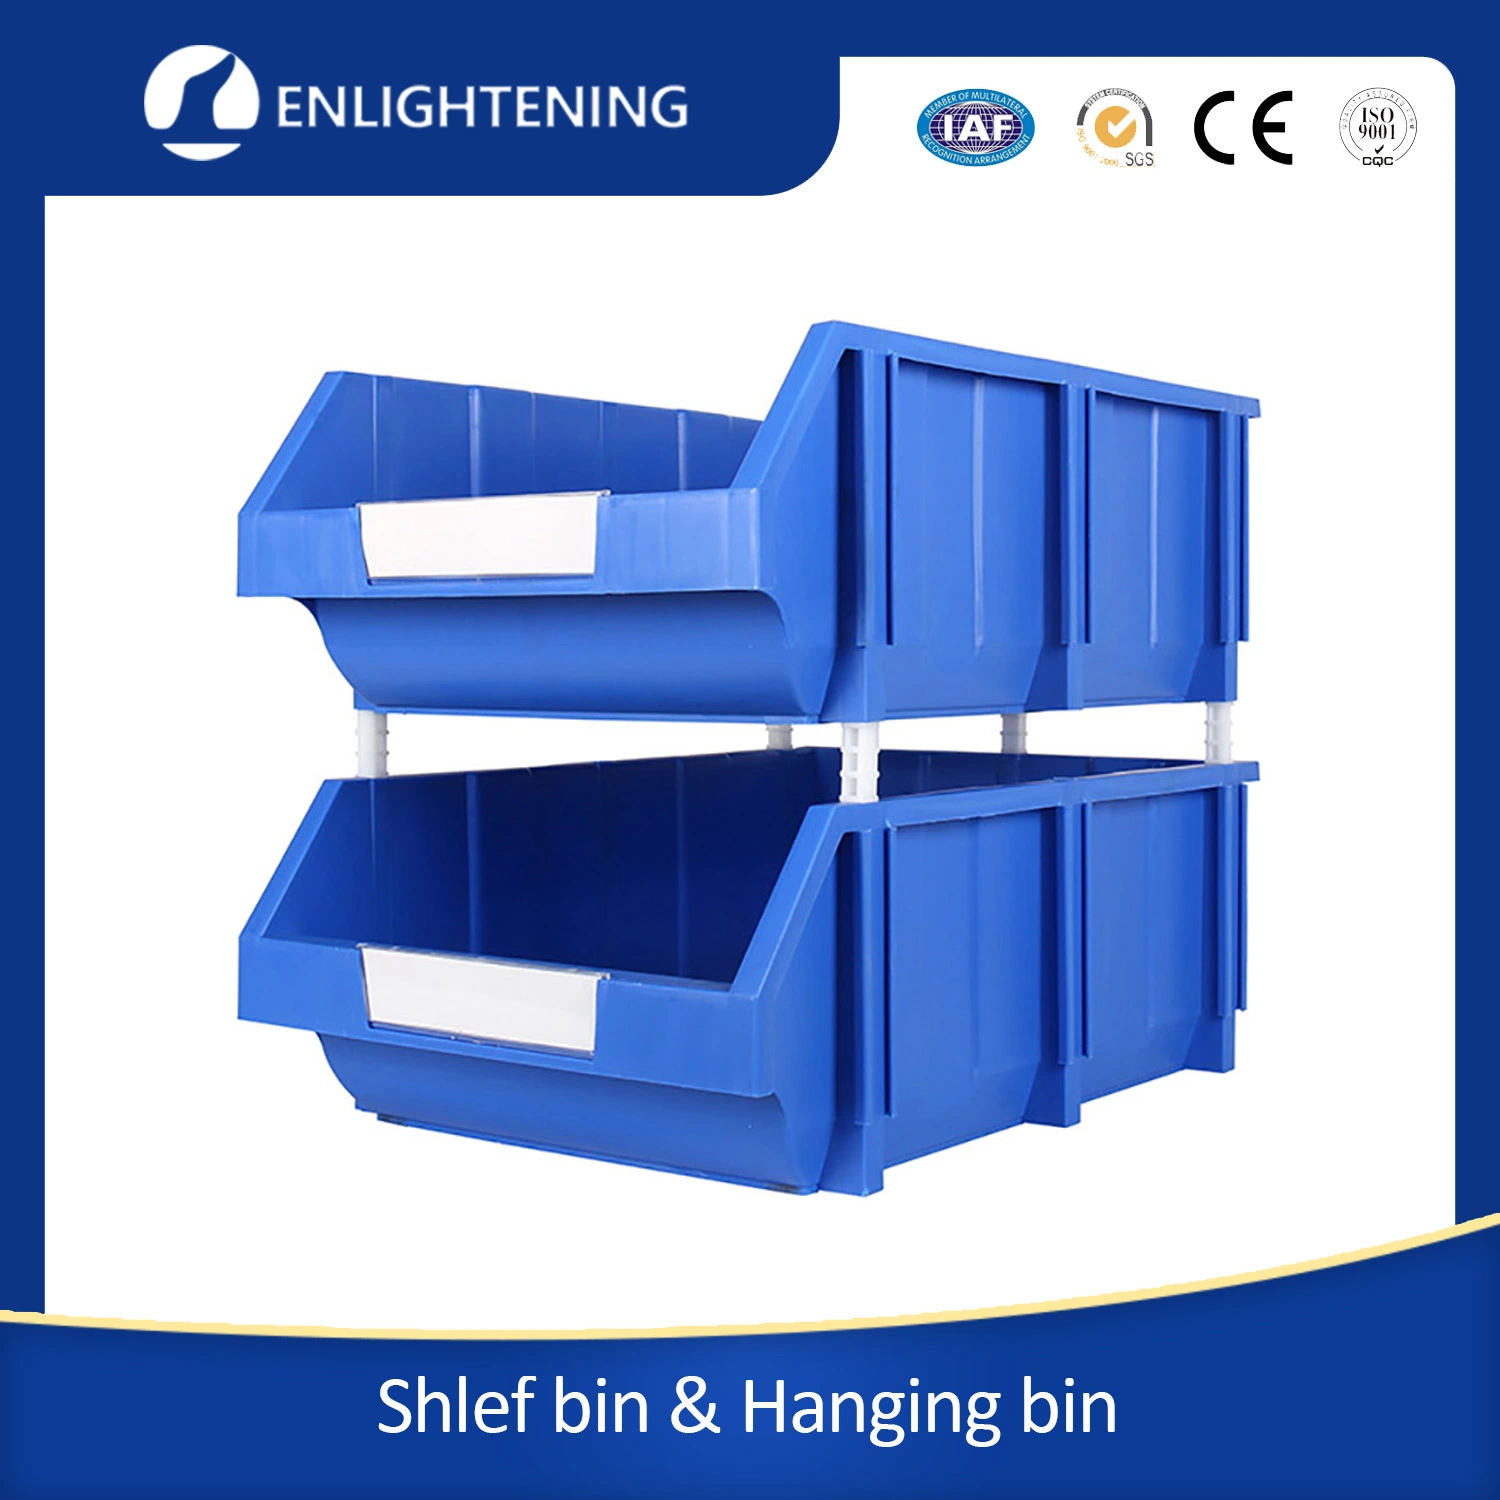 Fastener Automotive Industry Use Stack Plastic Spare Parts Pick Storage Bins for Tools Screws Bolts Nuts